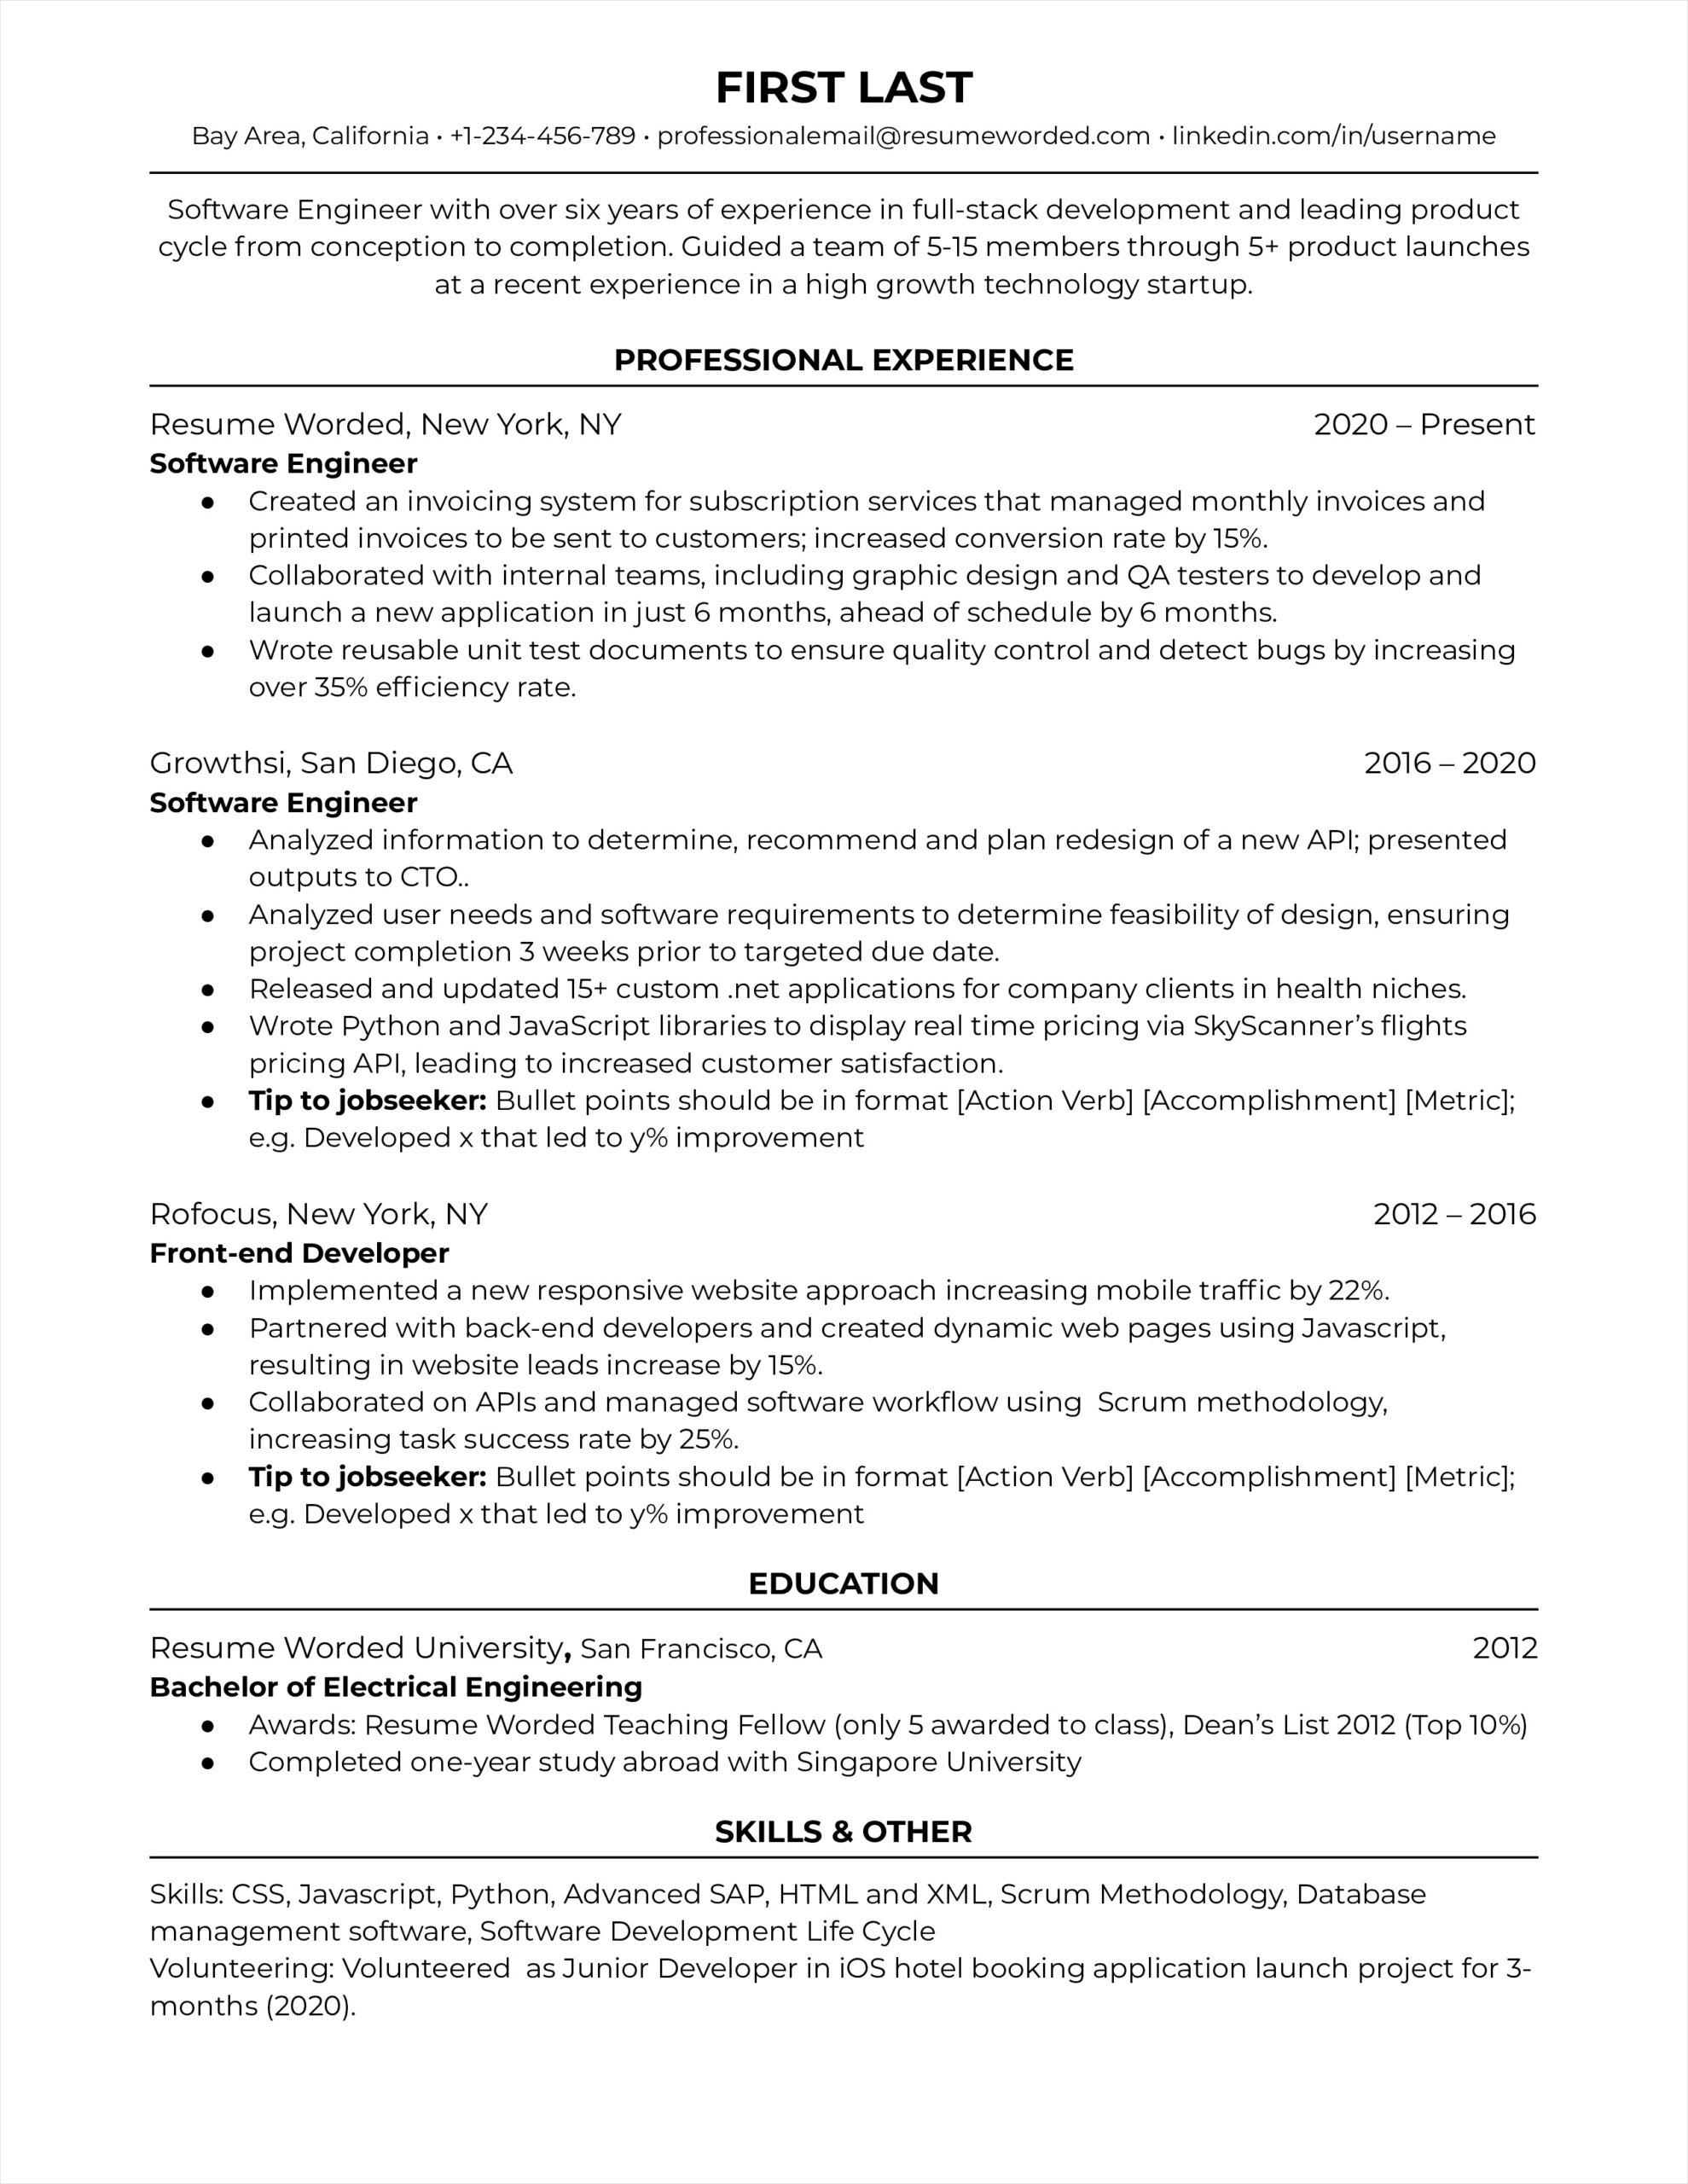 example of resume template for software developer